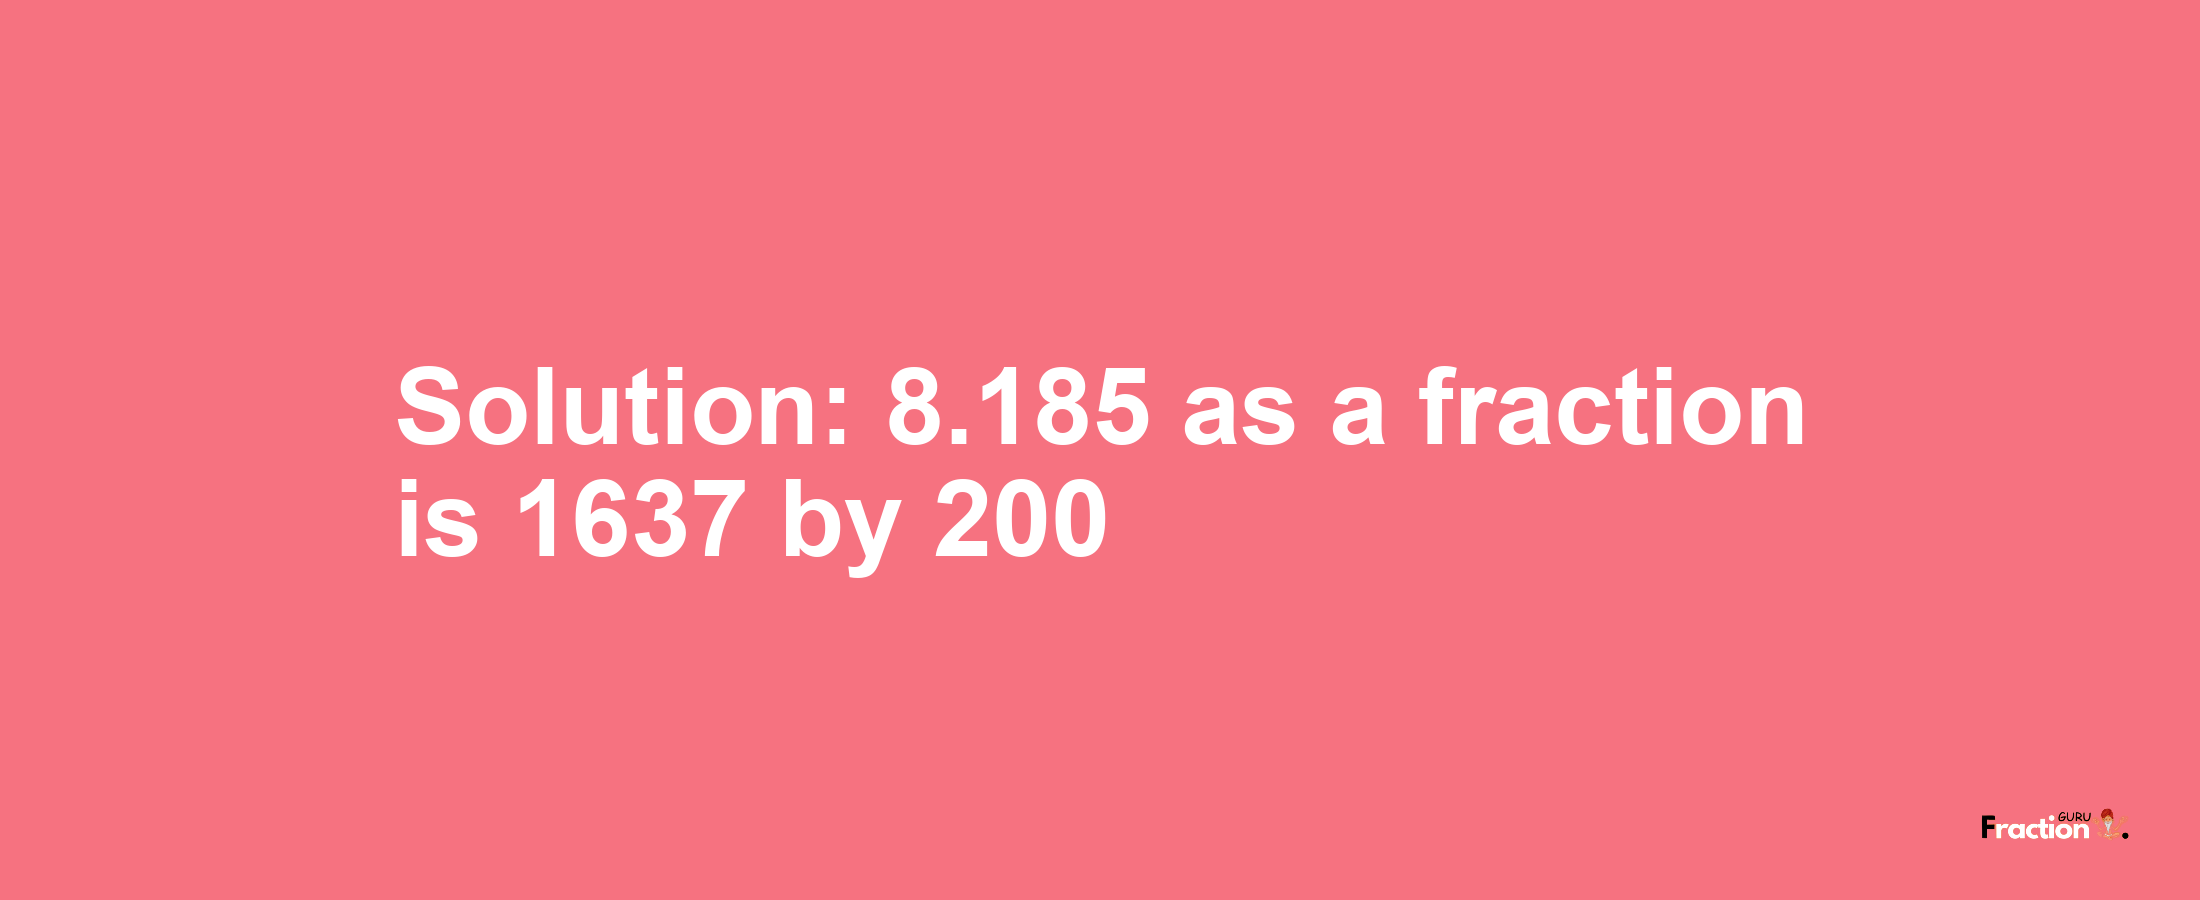 Solution:8.185 as a fraction is 1637/200